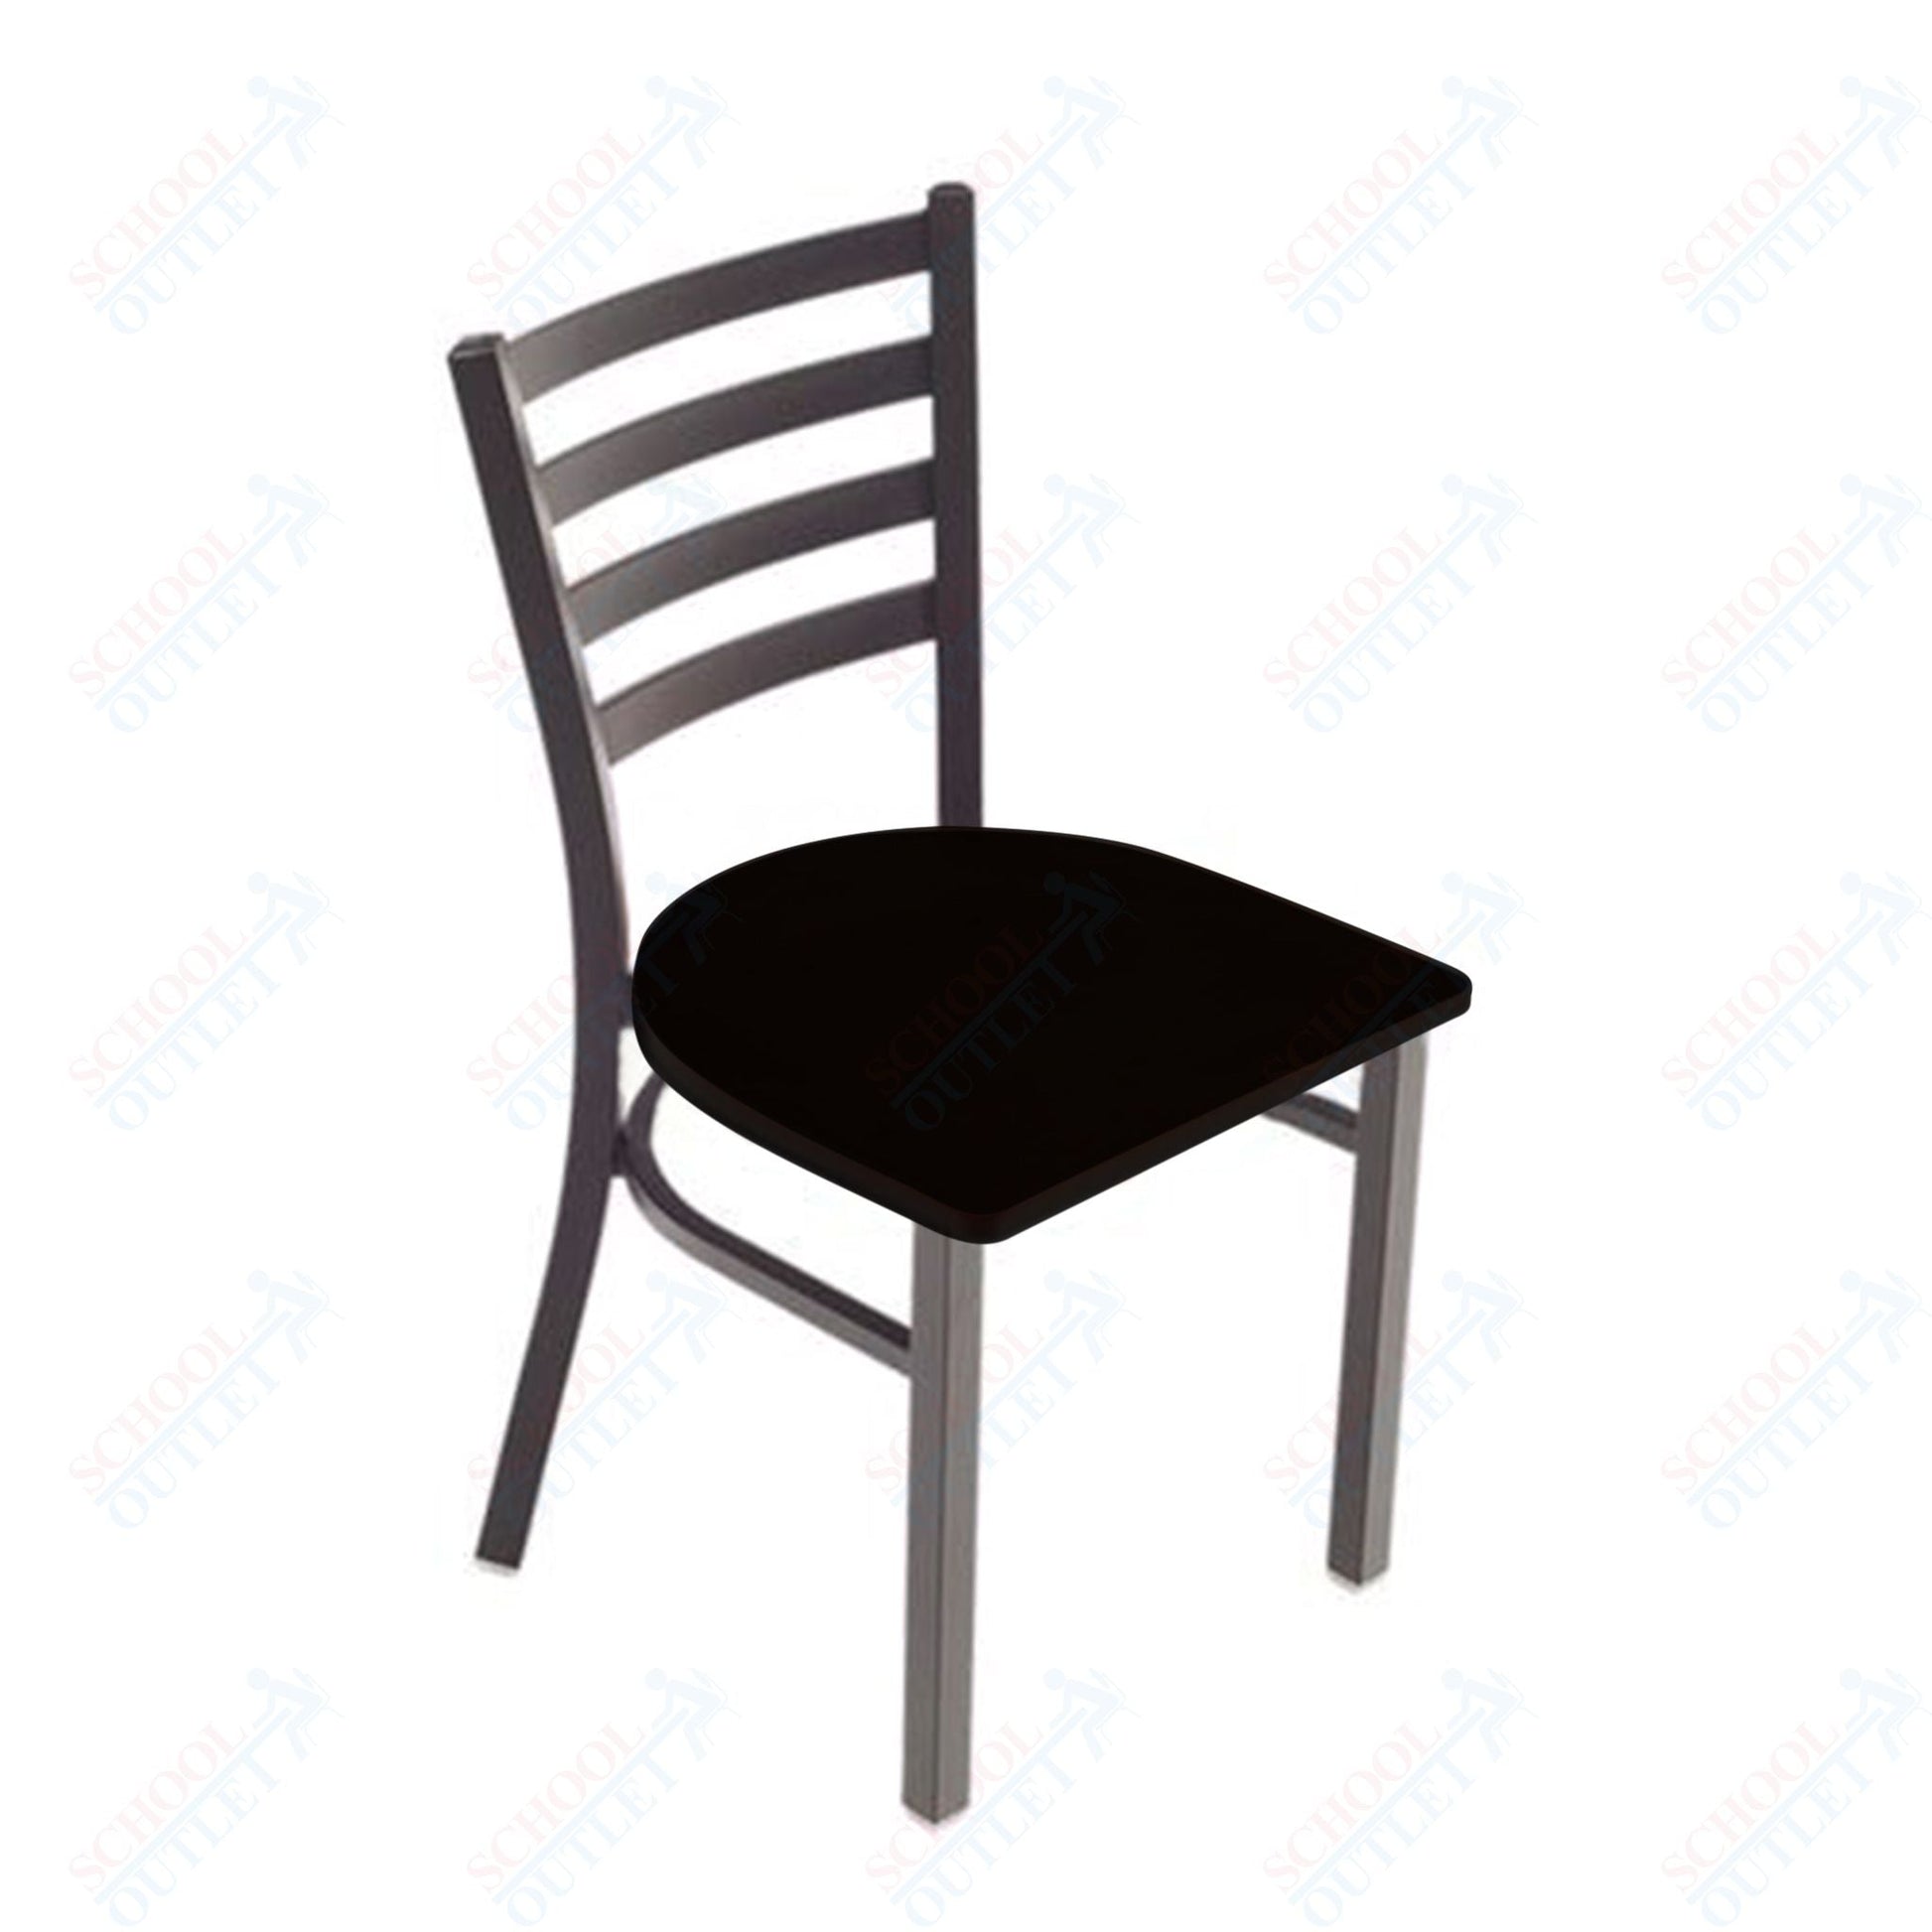 AmTab Cafe Chair - 16.5"W x 17"L x 32.25"H - Seat Height 17.25"H (AMT - CAFECHAIR - 4) - SchoolOutlet